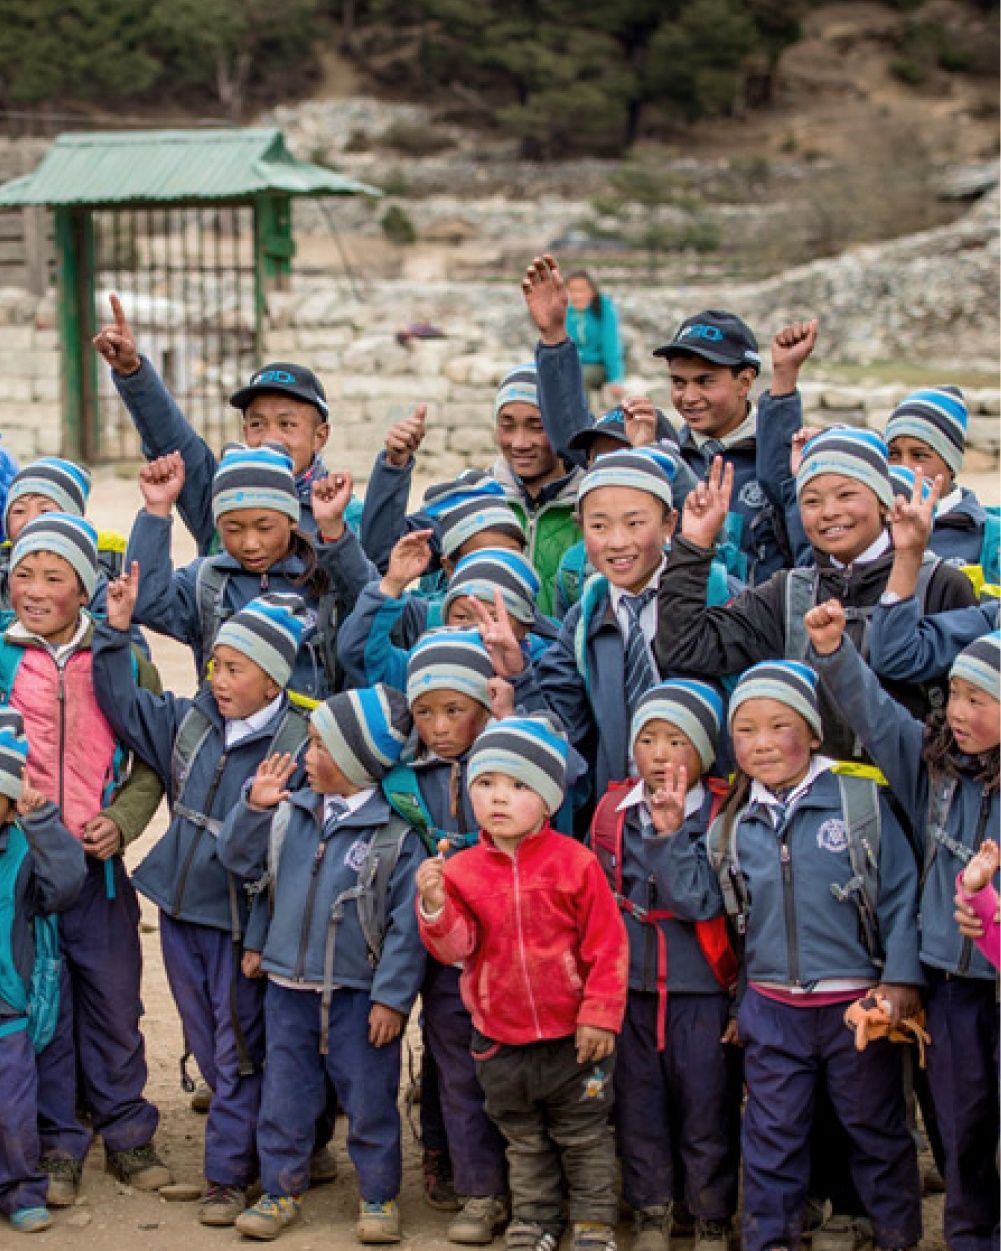 A group of children smile and wave to the camera.